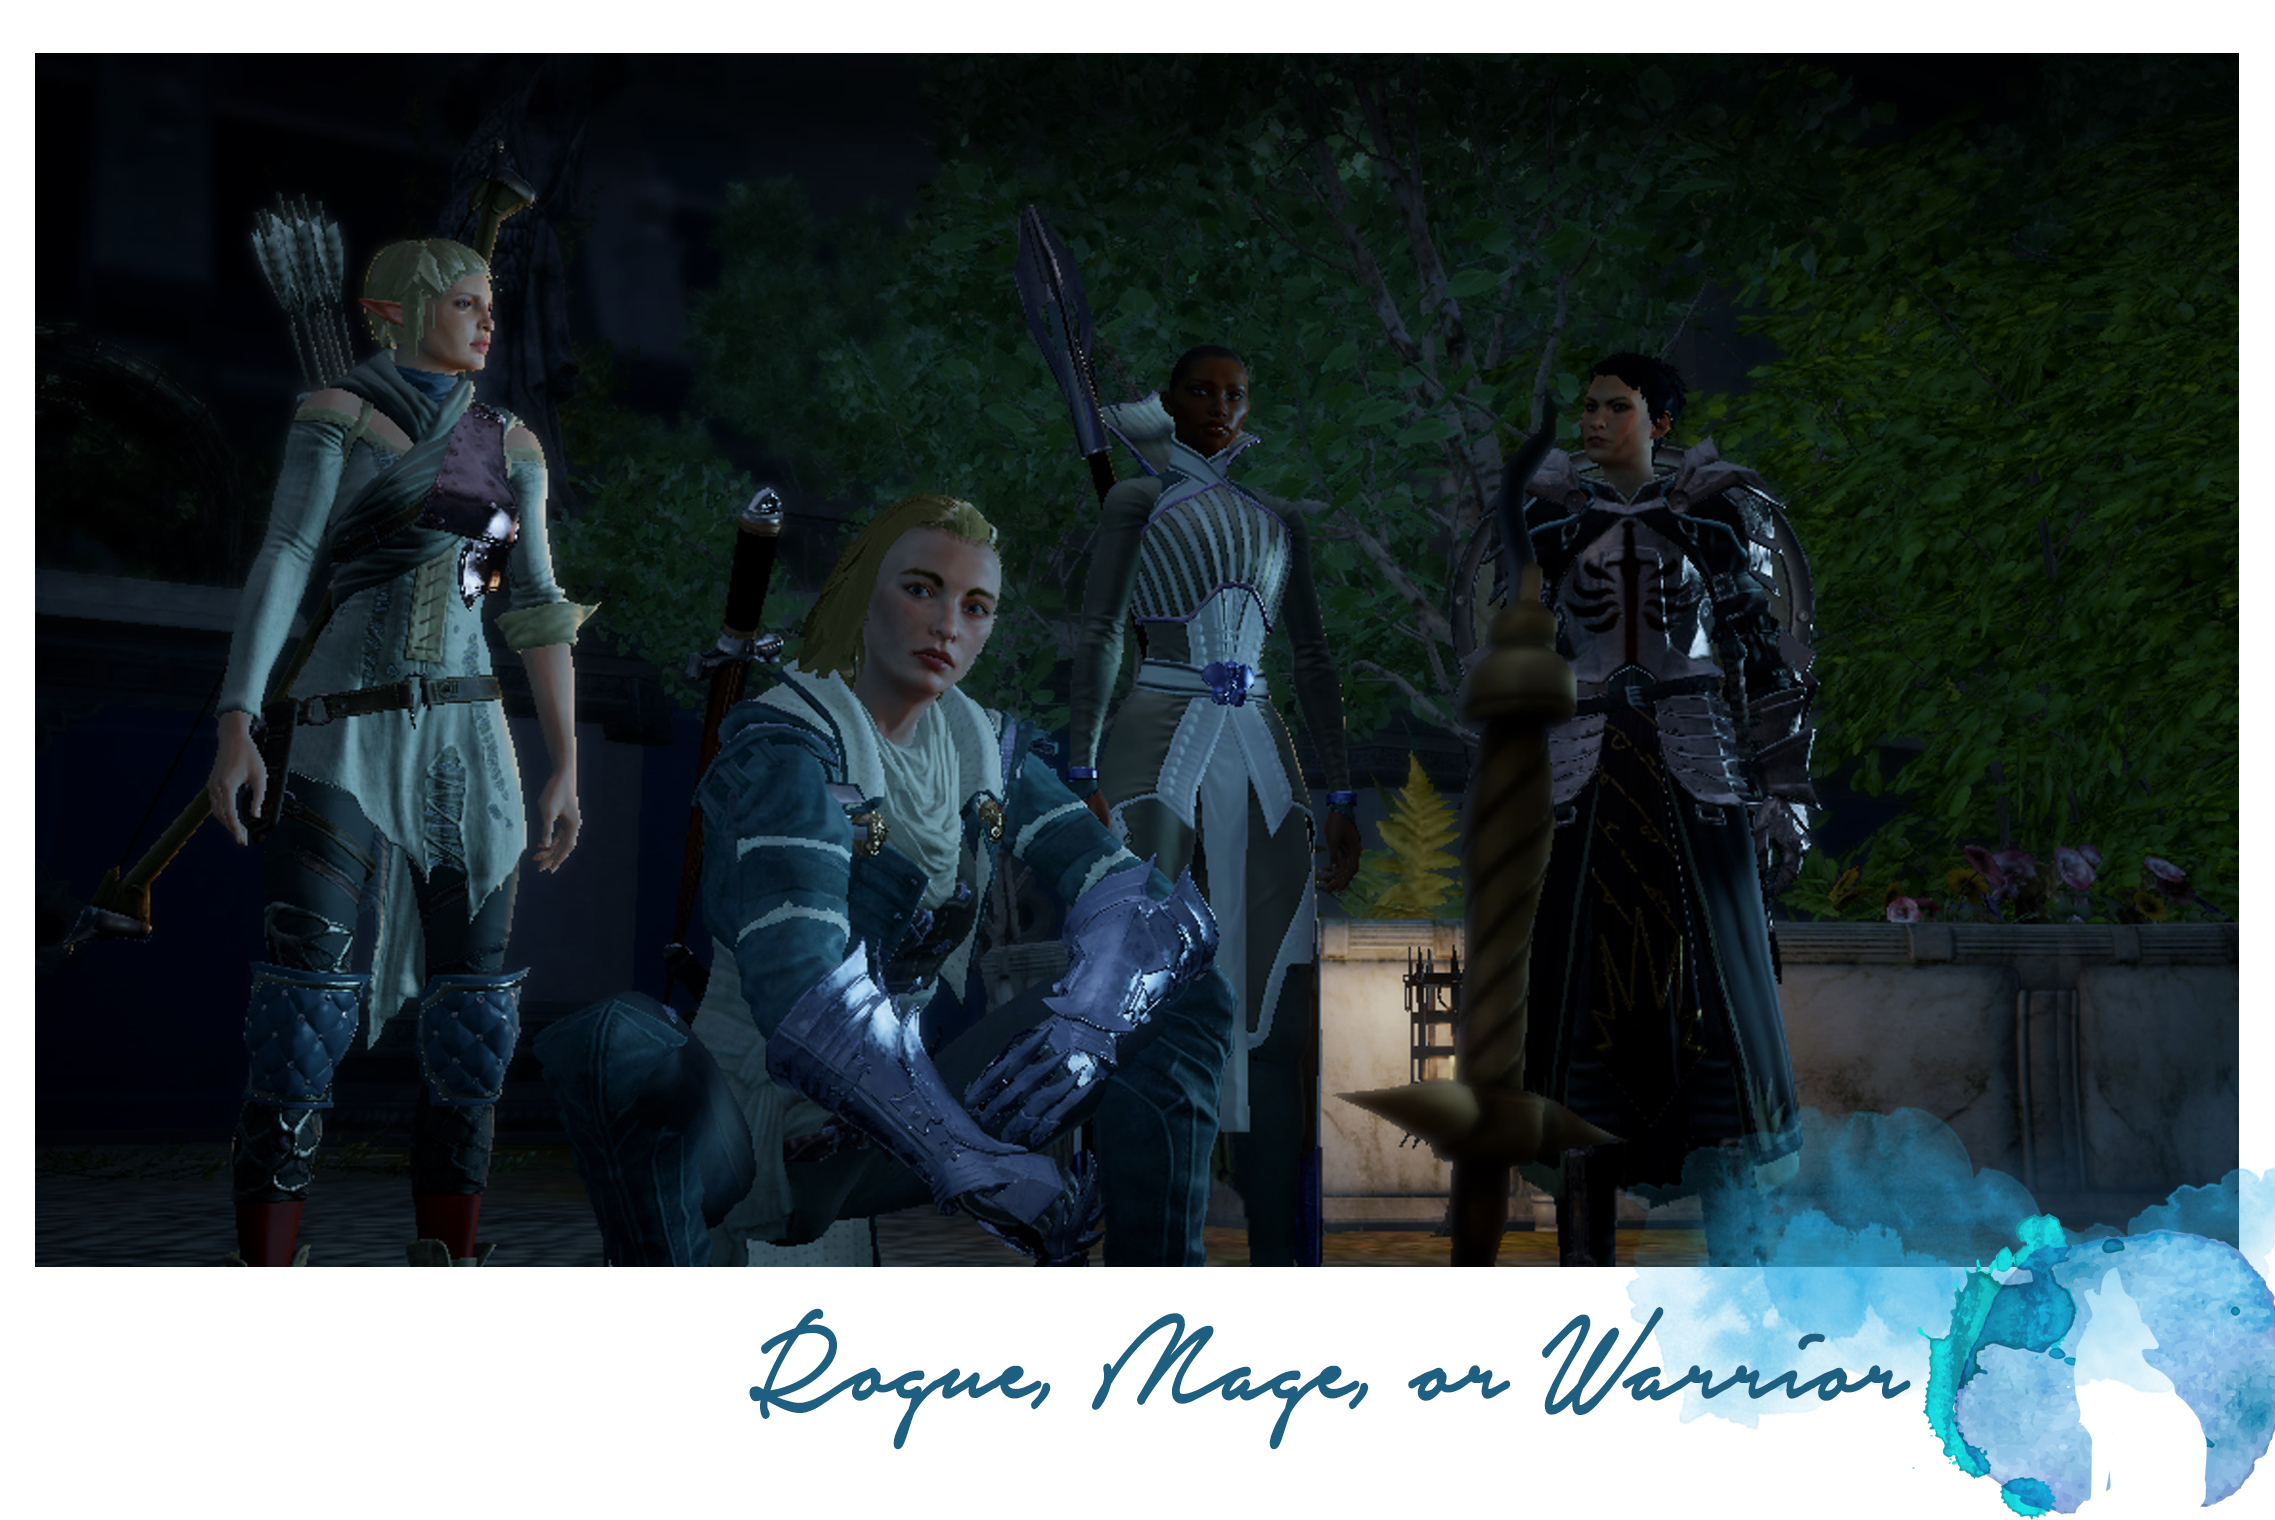 Dragon Age: Which Class is Better – Rogue, Mage, or Warrior?